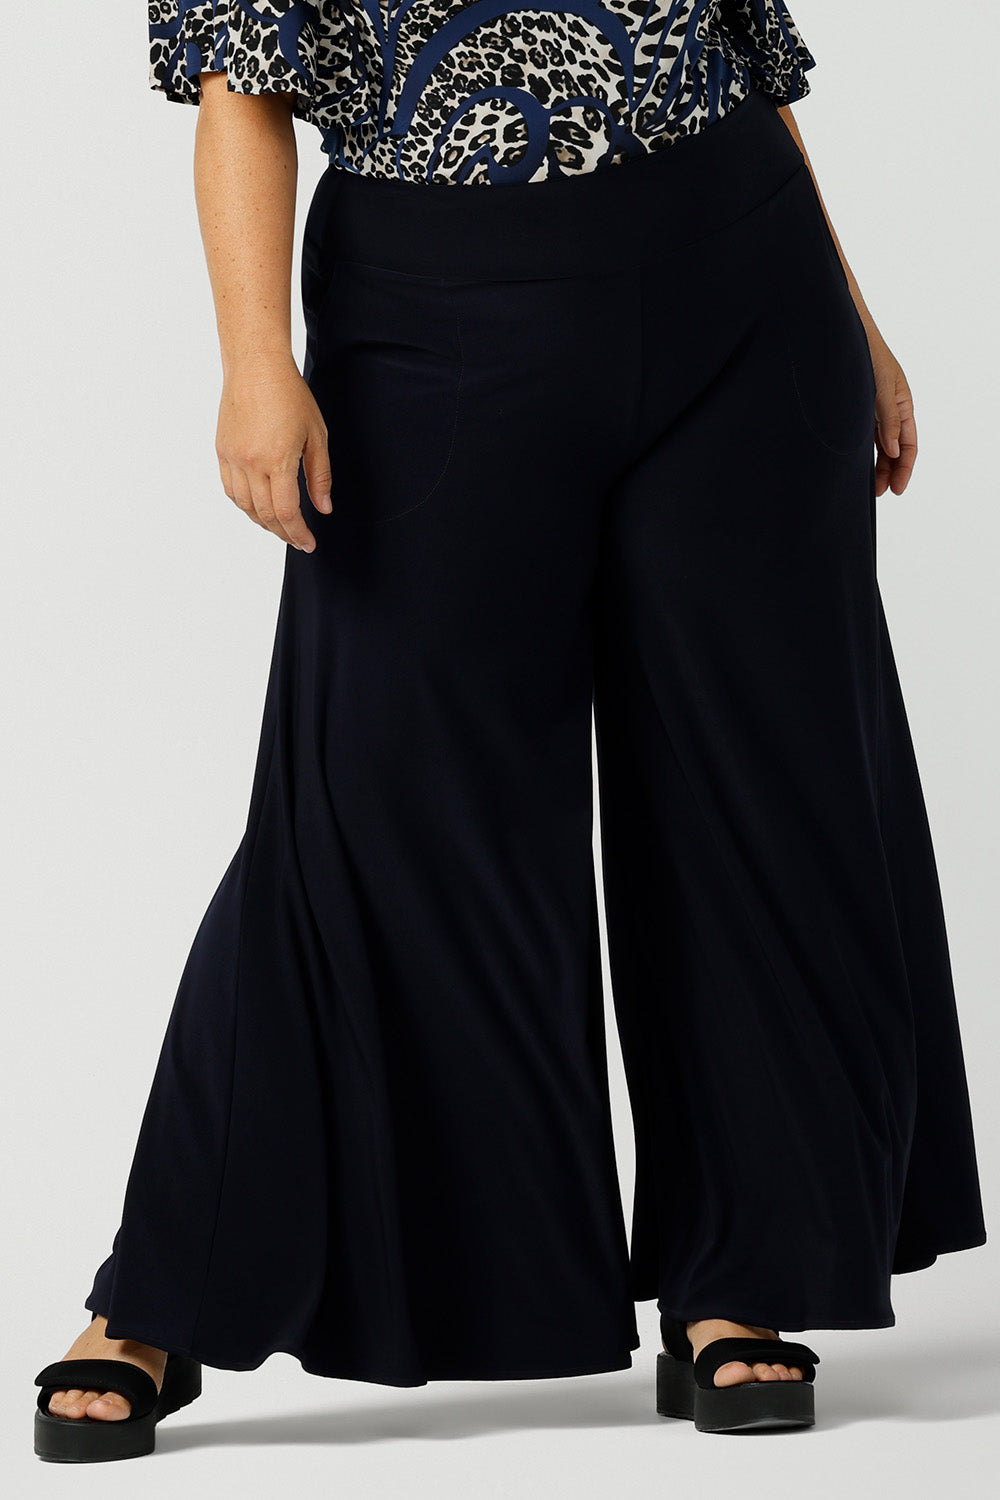 A curvy, size 16 woman wears navy wide leg pants with pockets. These pull-on, easy care pants are comfortable for your everyday capsule wardrobe. Shop these Australian-made wide leg trousers online in sizes 8 to 24, petite to plus sizes.